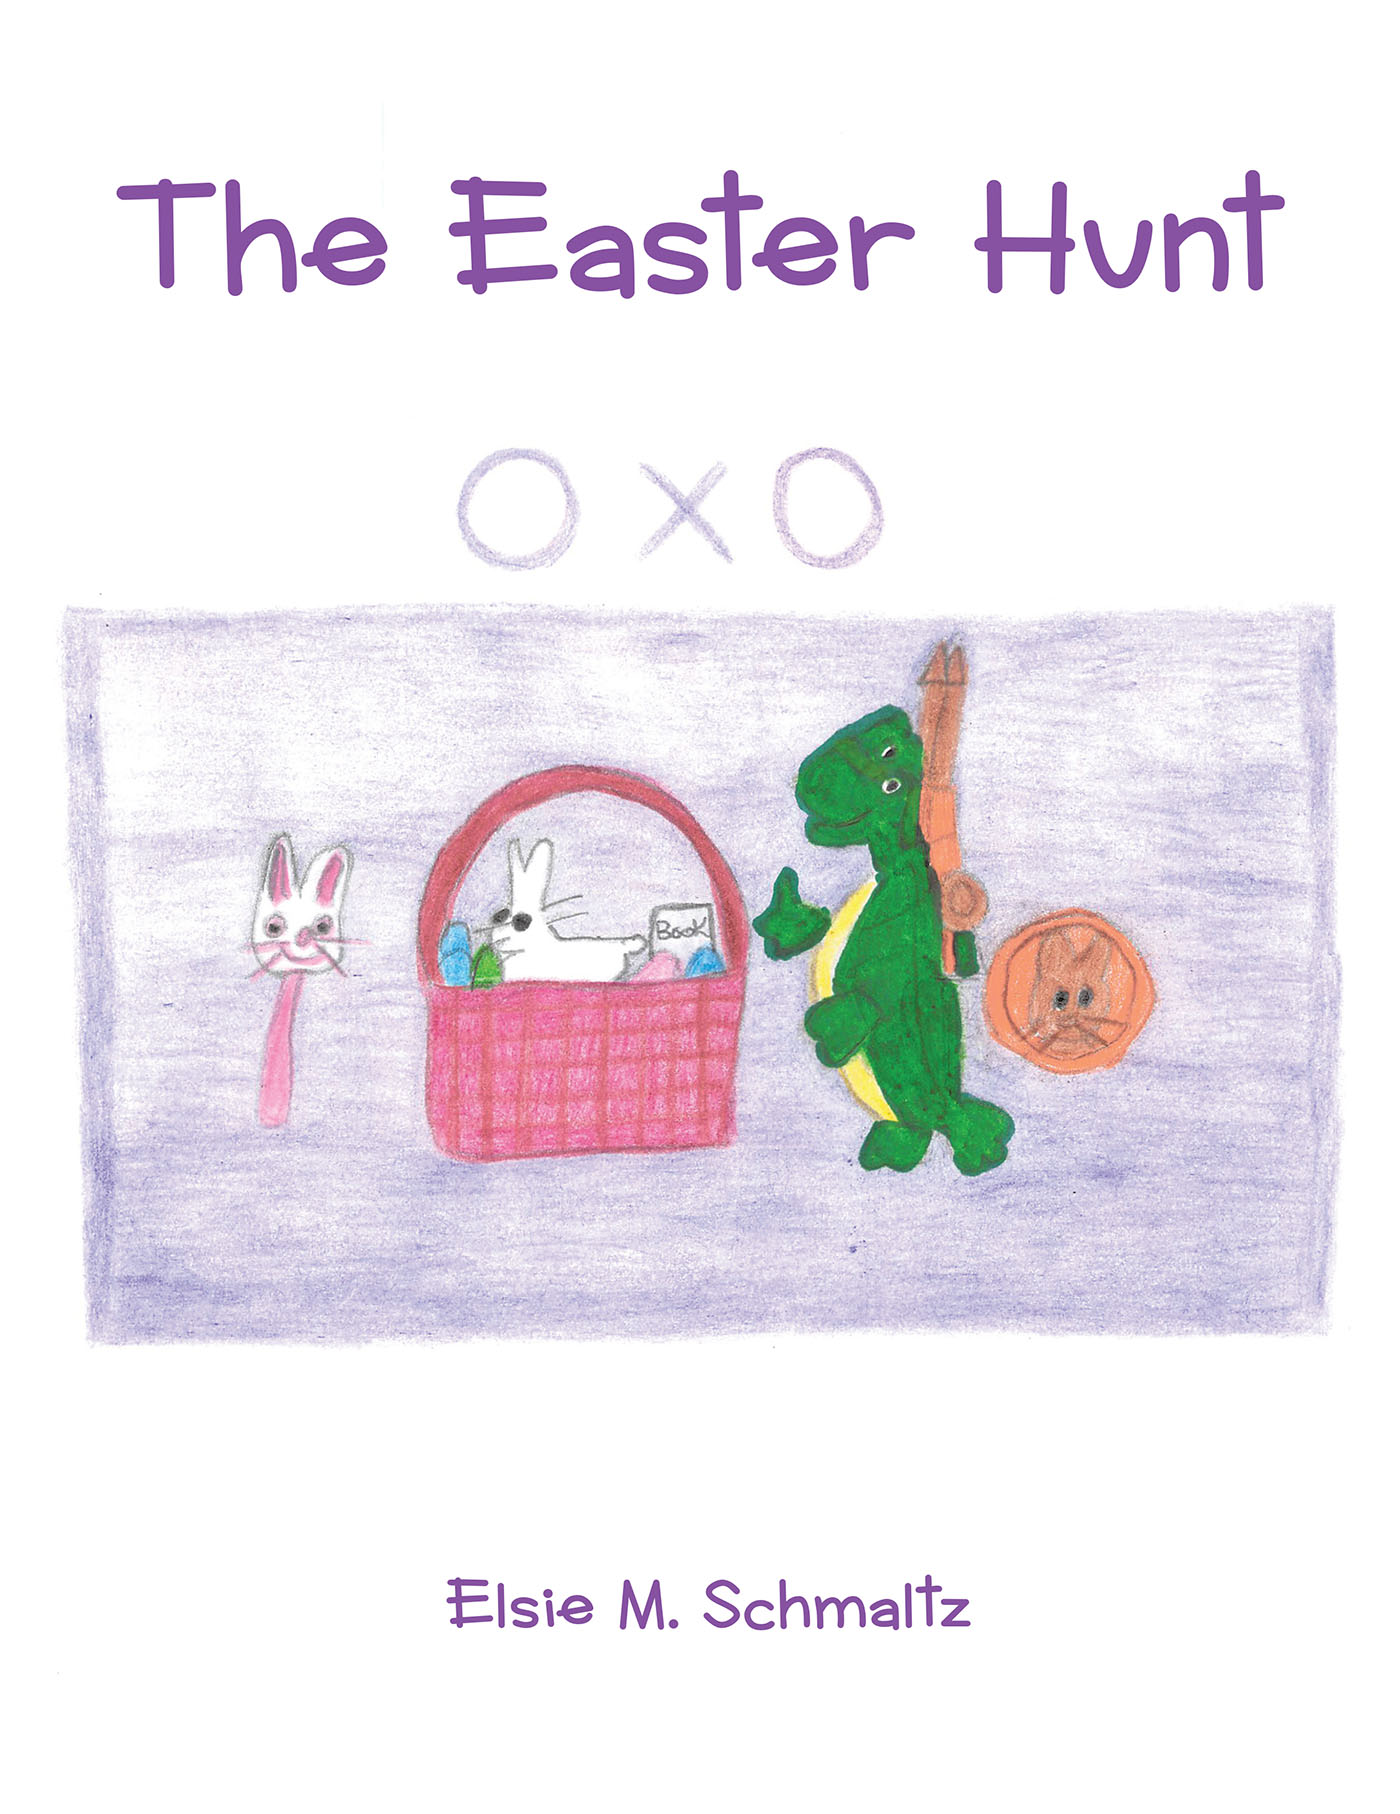 Elsie M. Schmaltz’s Newly Released "The Easter Hunt" is an Entertaining Tale of Friendship as a Little Turtle Prepares for an Exciting Egg Hunt